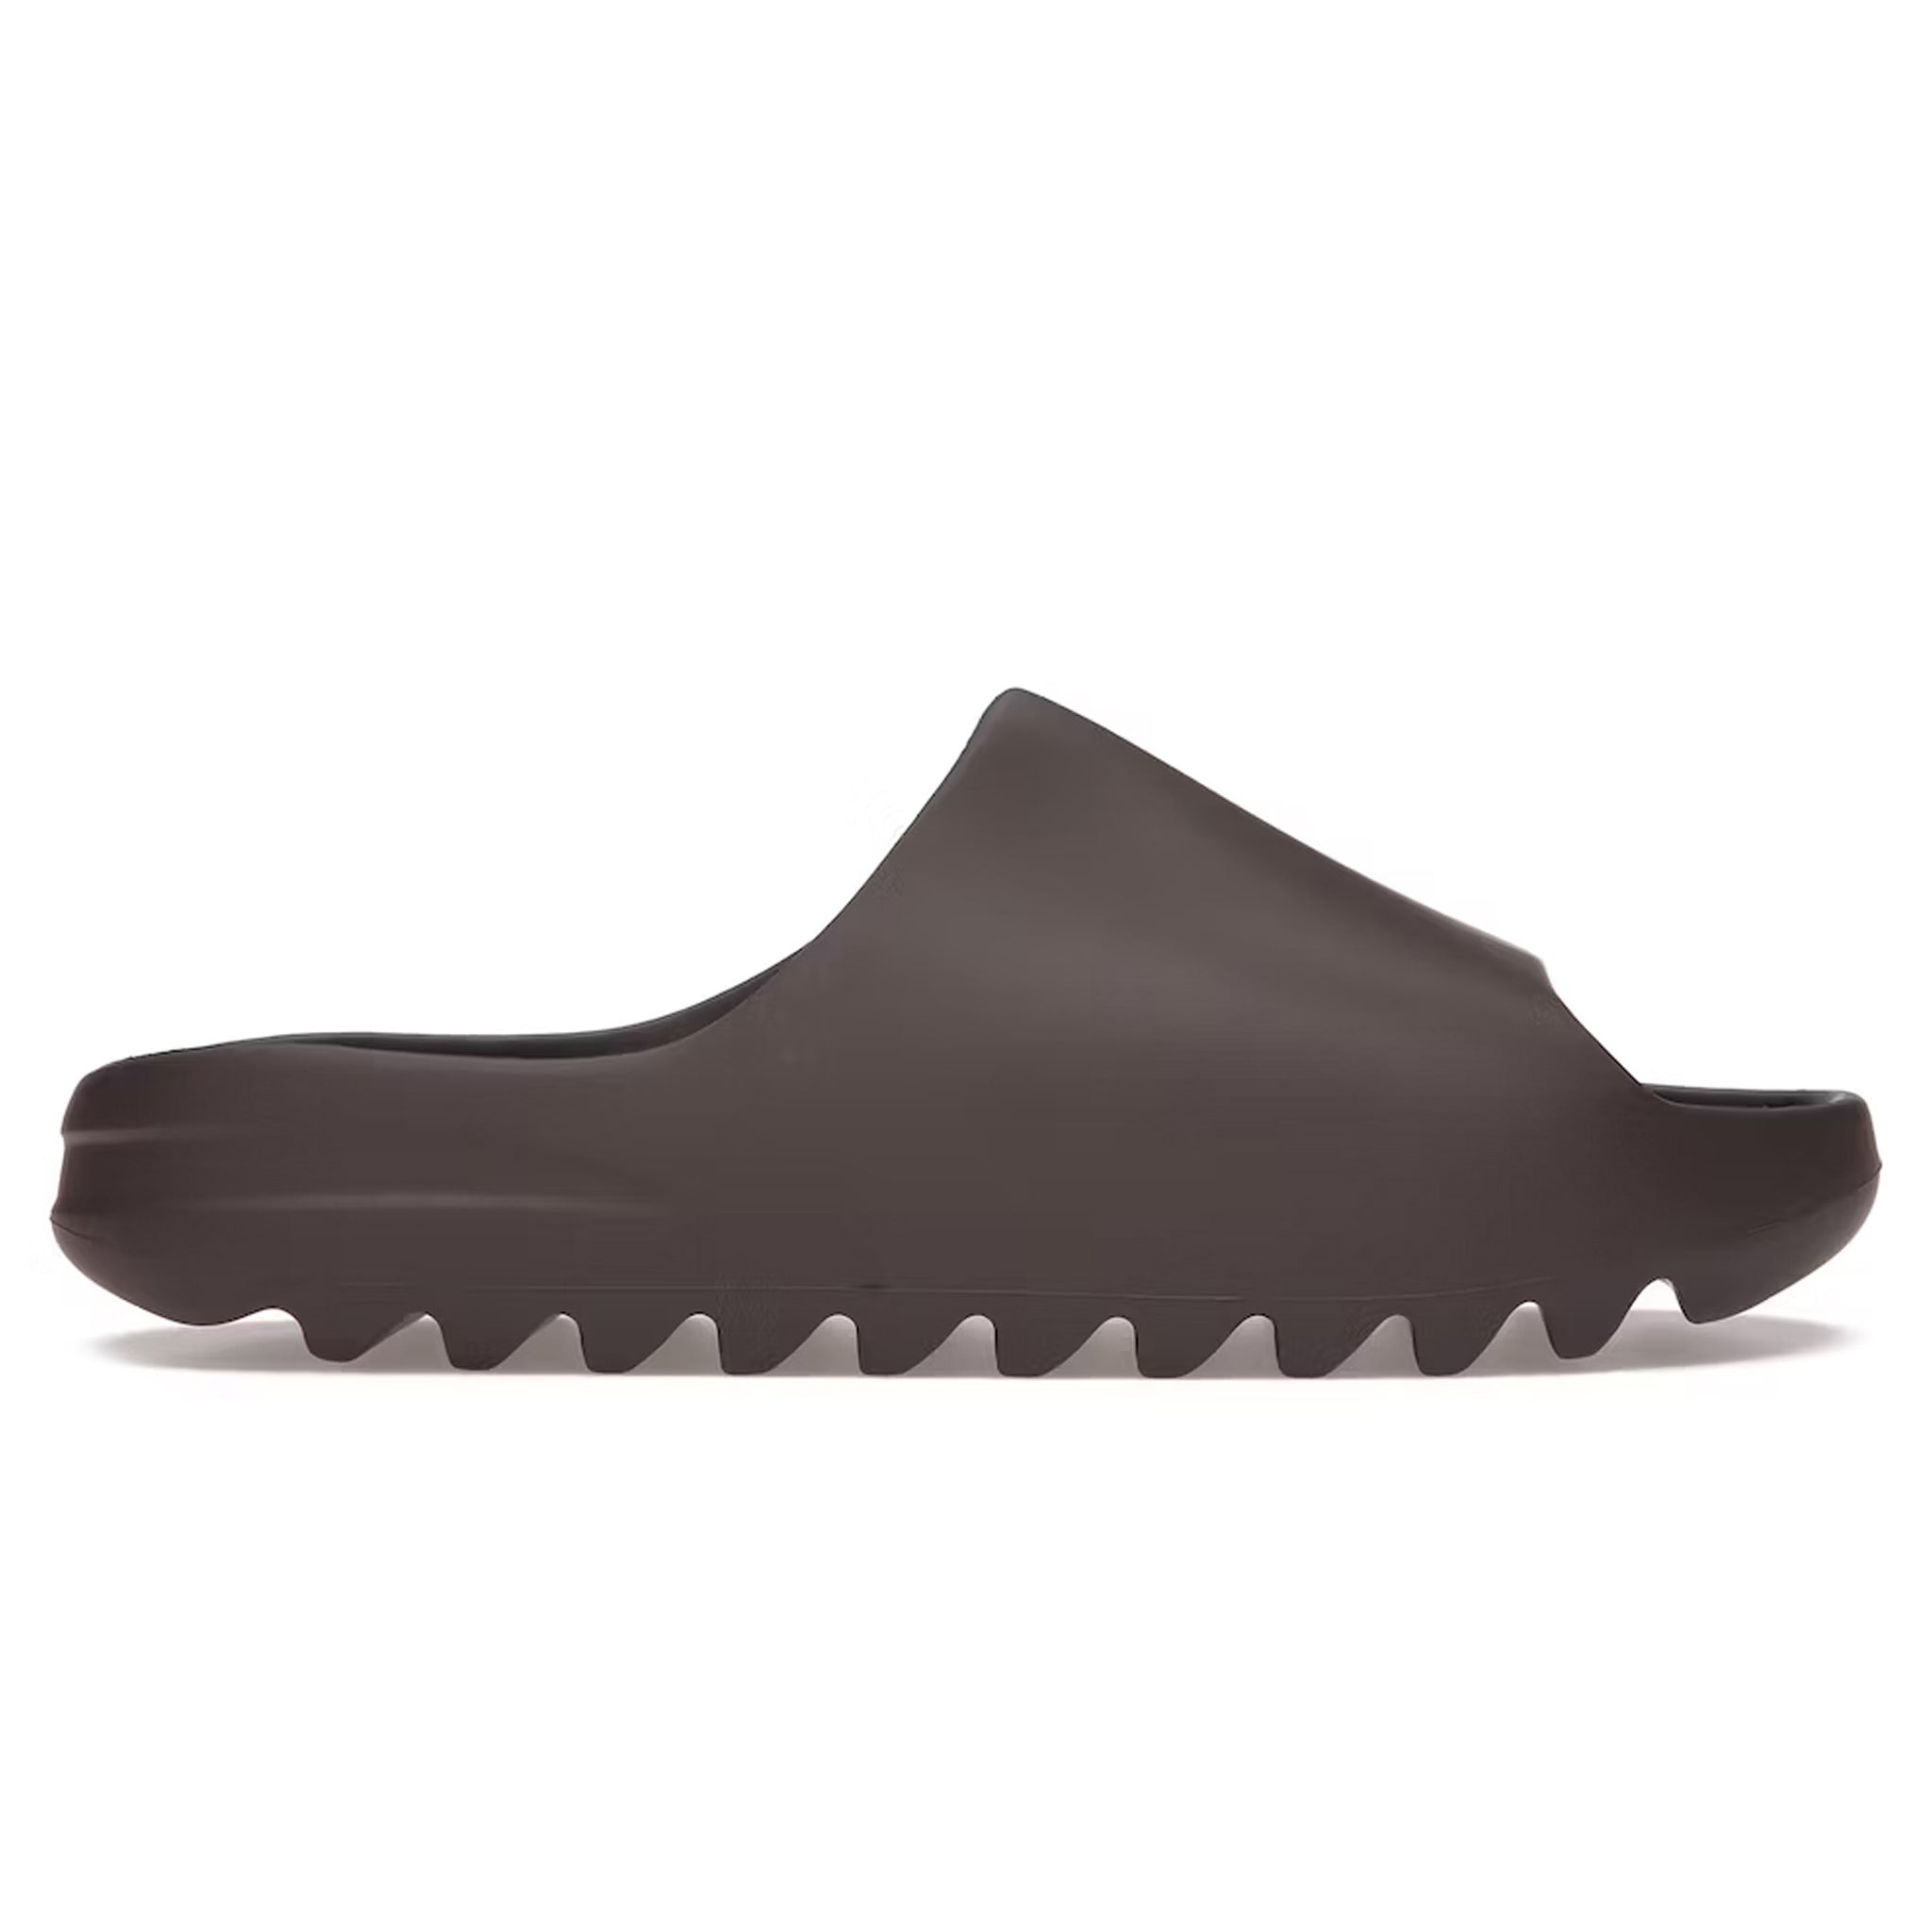 Side view of Adidas Yeezy Slide Soot GX6141